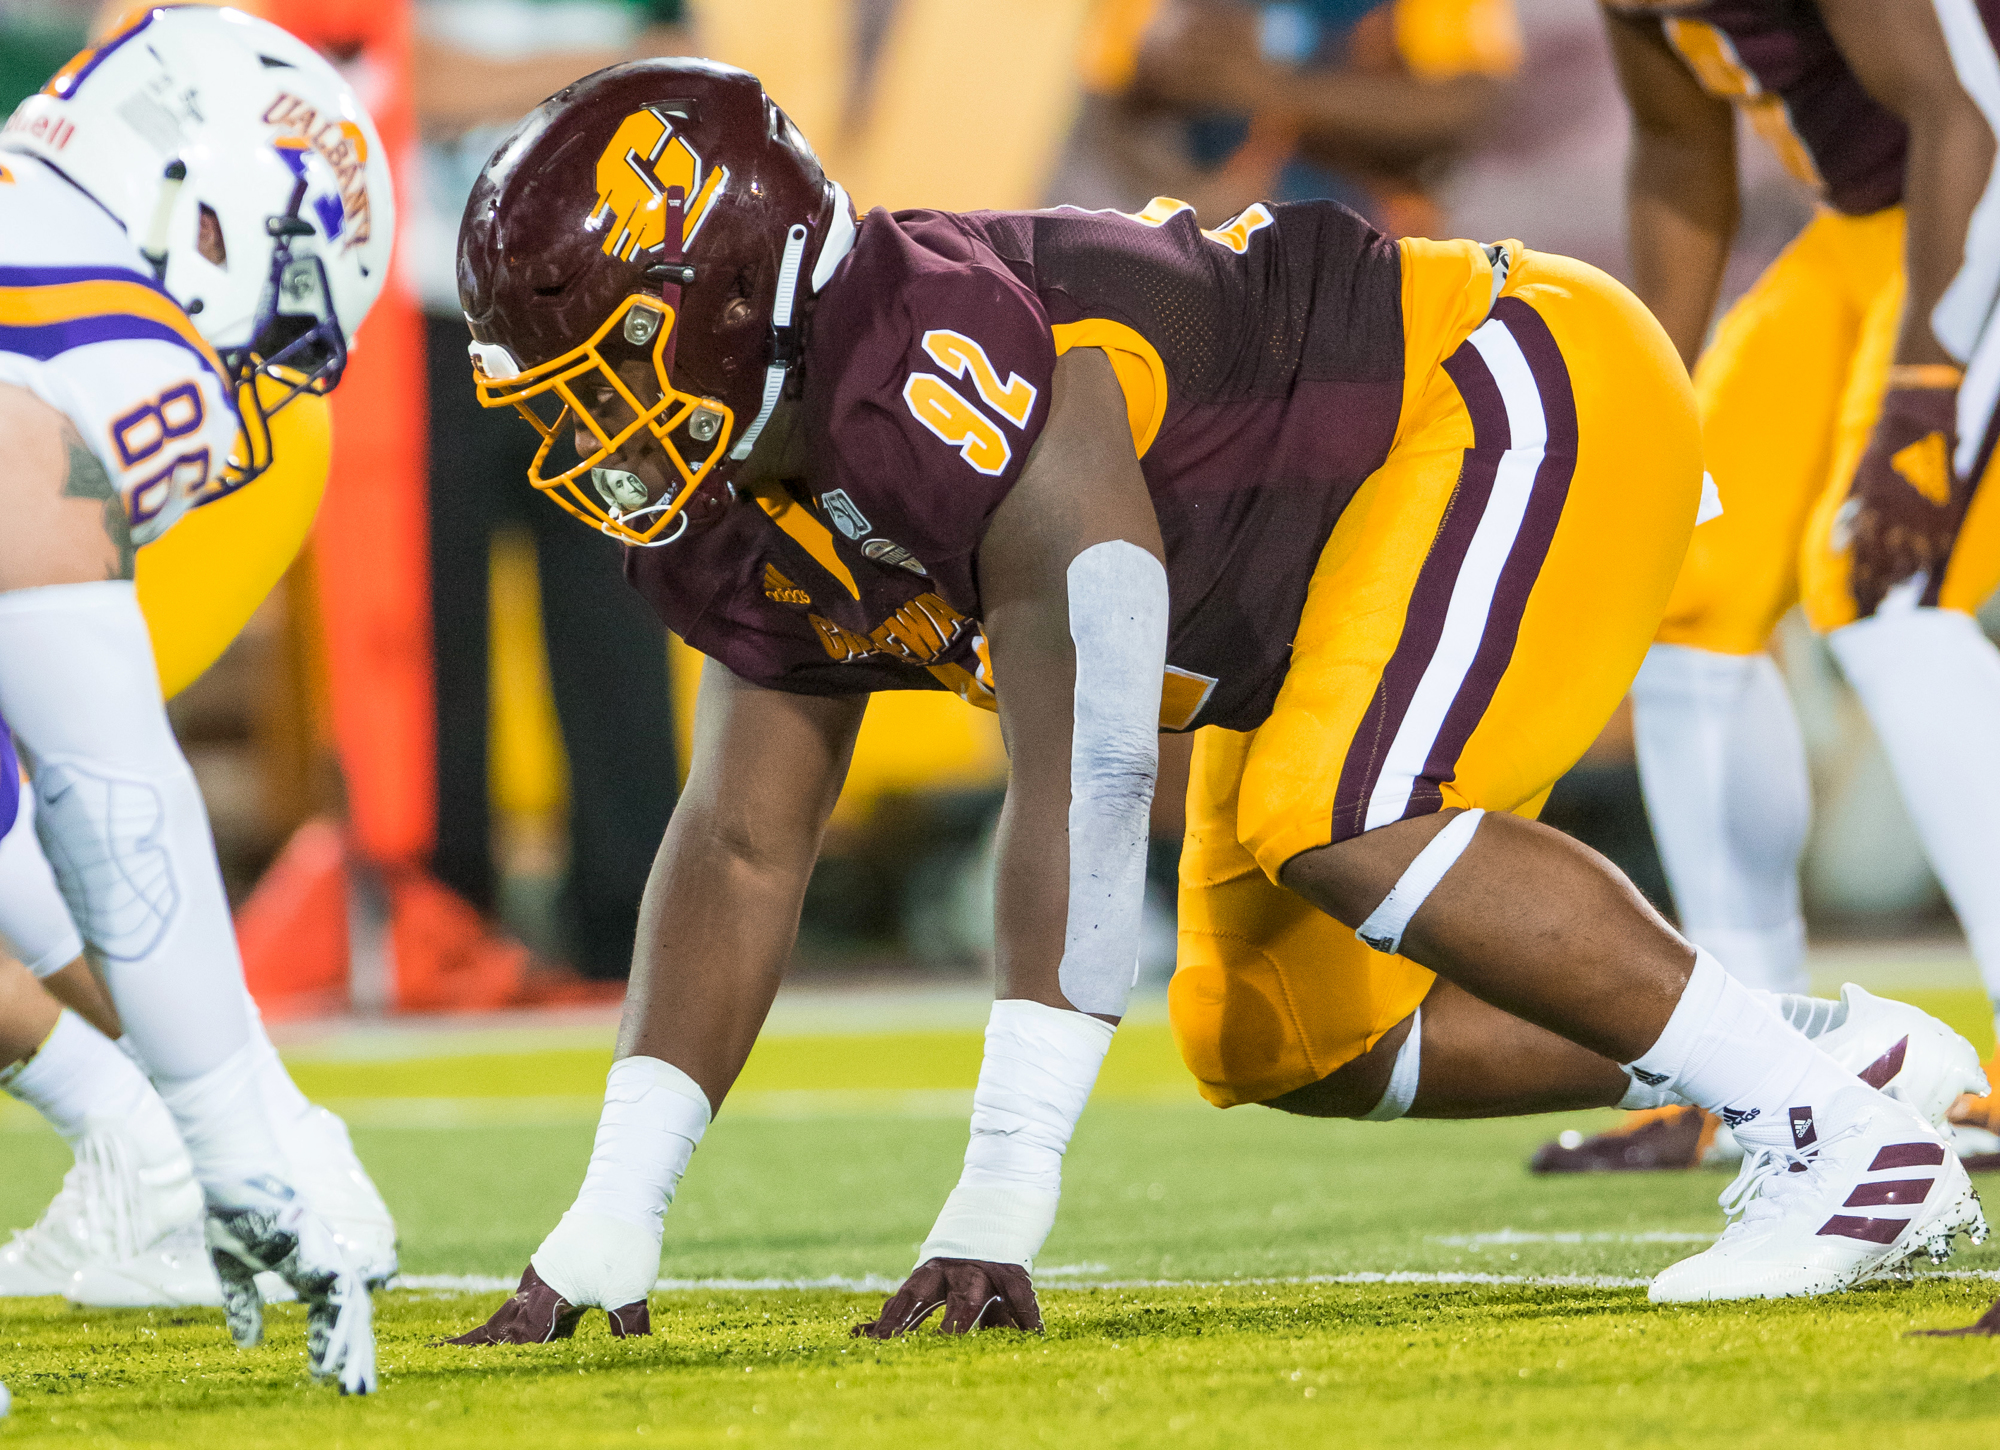 Former Booker High star Jacques Bristol has become a stalwart at defensive tackle for Central Michigan. (Photo courtesy of CMU Athletic Communications.)